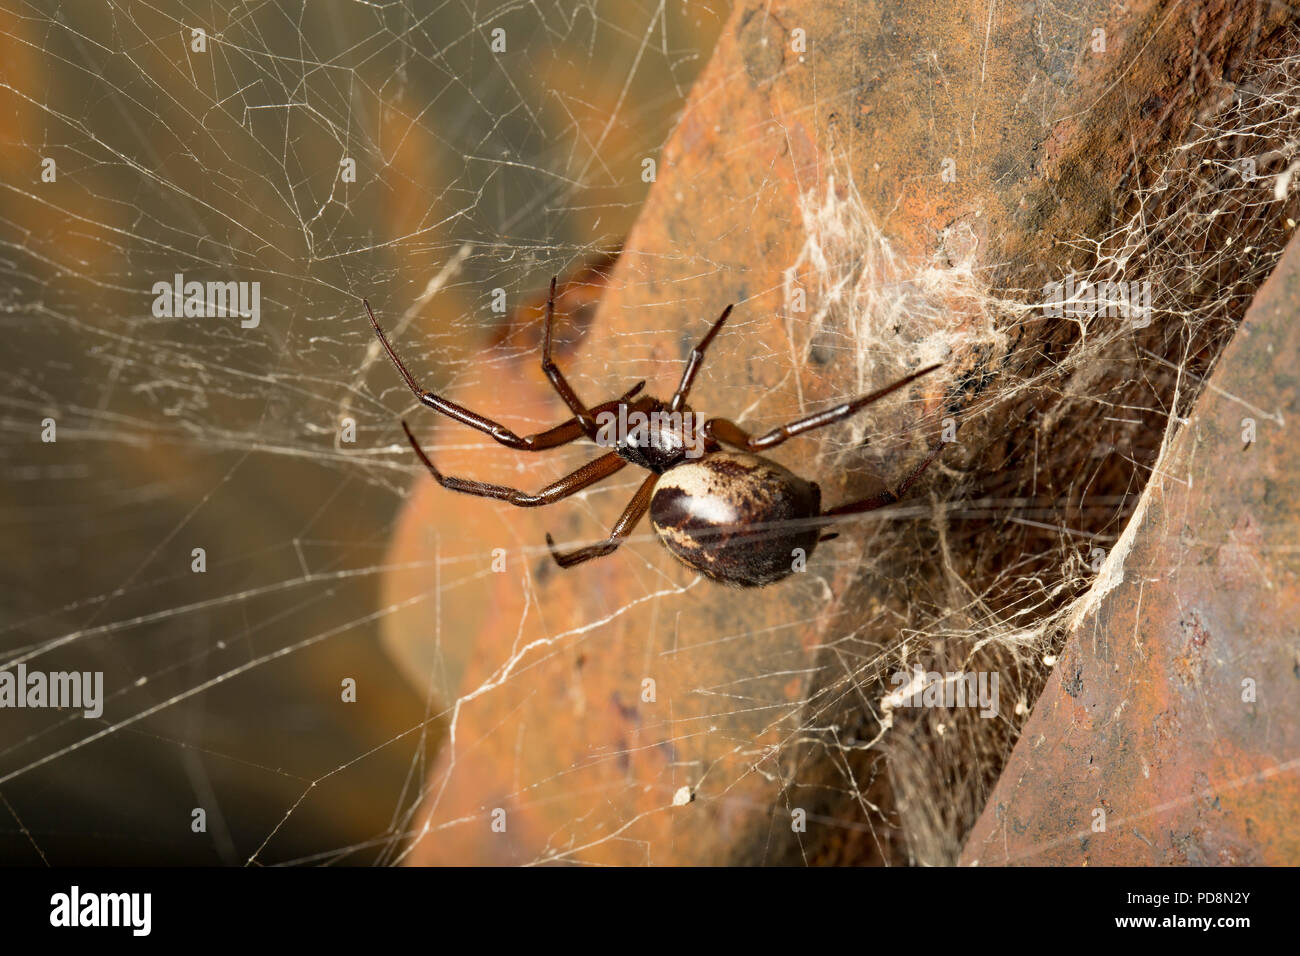 A spider in its web photographed at night next to a metal pipe on the eastern side of the Isle of Portland. The spider appears to match the descriptio Stock Photo